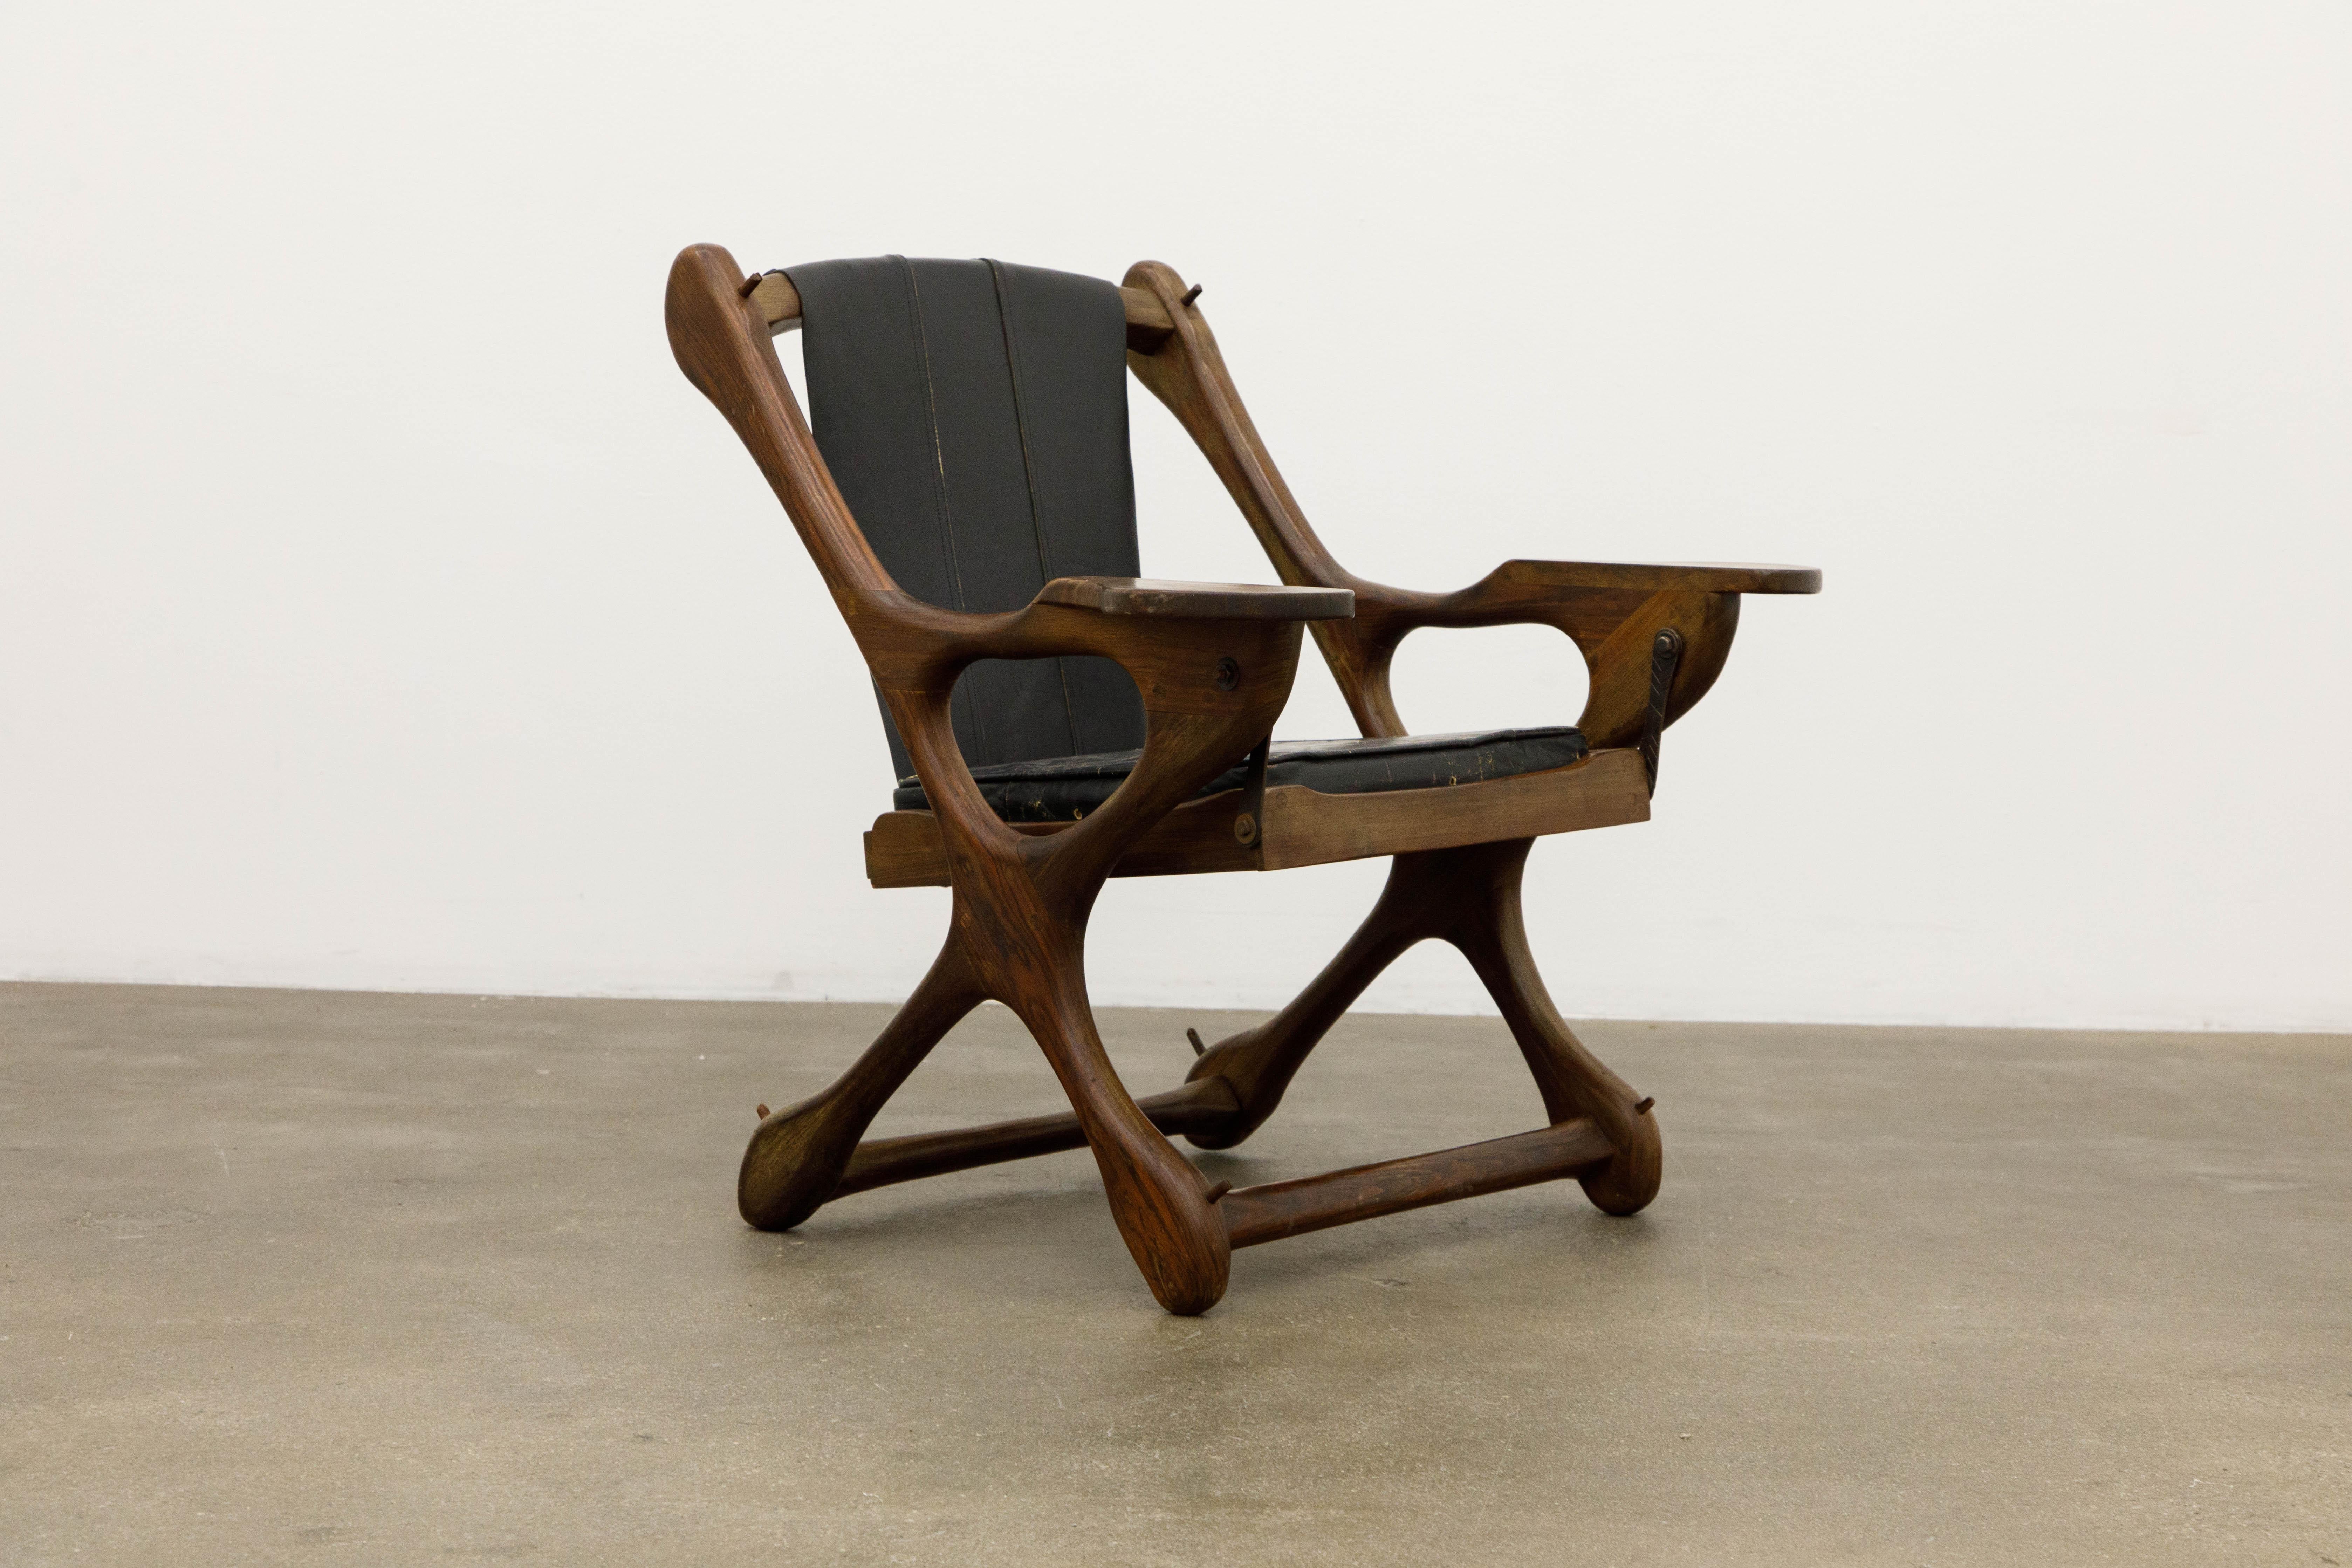 Named the 'Swinger Chair' for its pivoting mechanism that allows you to swing in your seat, this incredible cocobolo rosewood and black leather 'Swinger' rocking armchair by leading 1960s modernist designer Don Shoemaker for Senal S.A. (Mexico) is